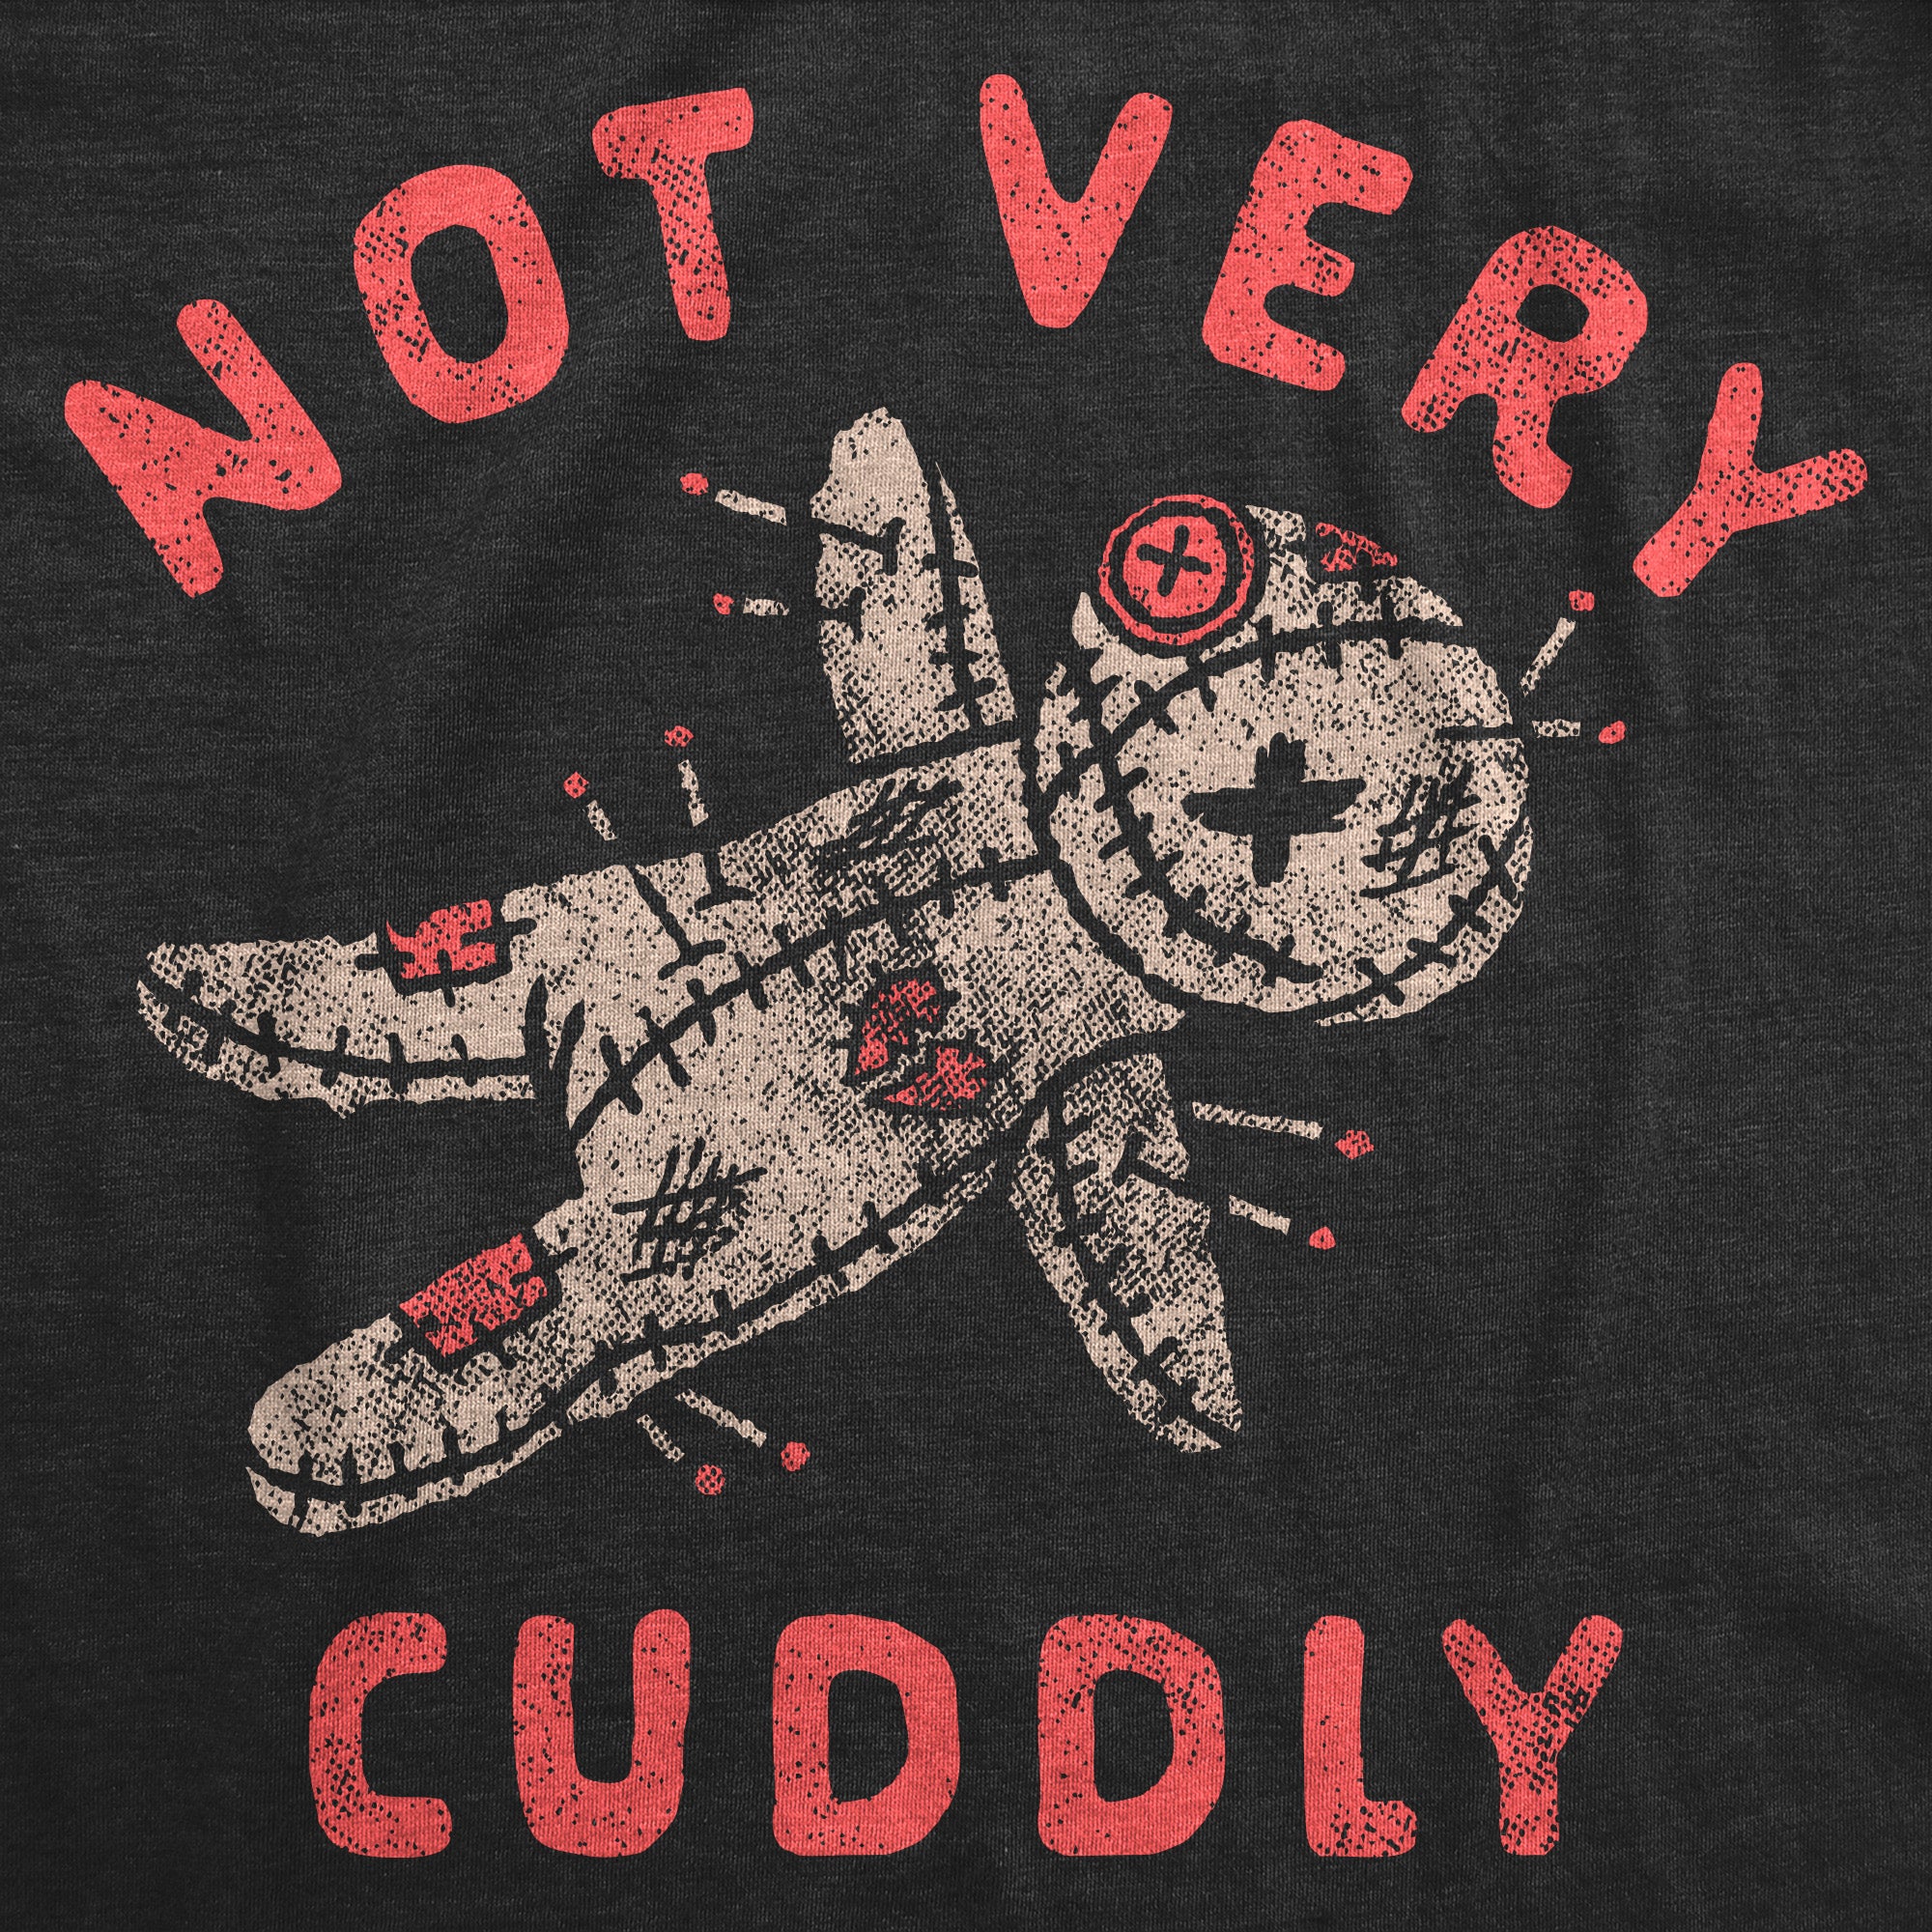 Funny Heather Black - Not Very Cuddly Not Very Cuddly Womens T Shirt Nerdy Valentine's Day Sarcastic Tee